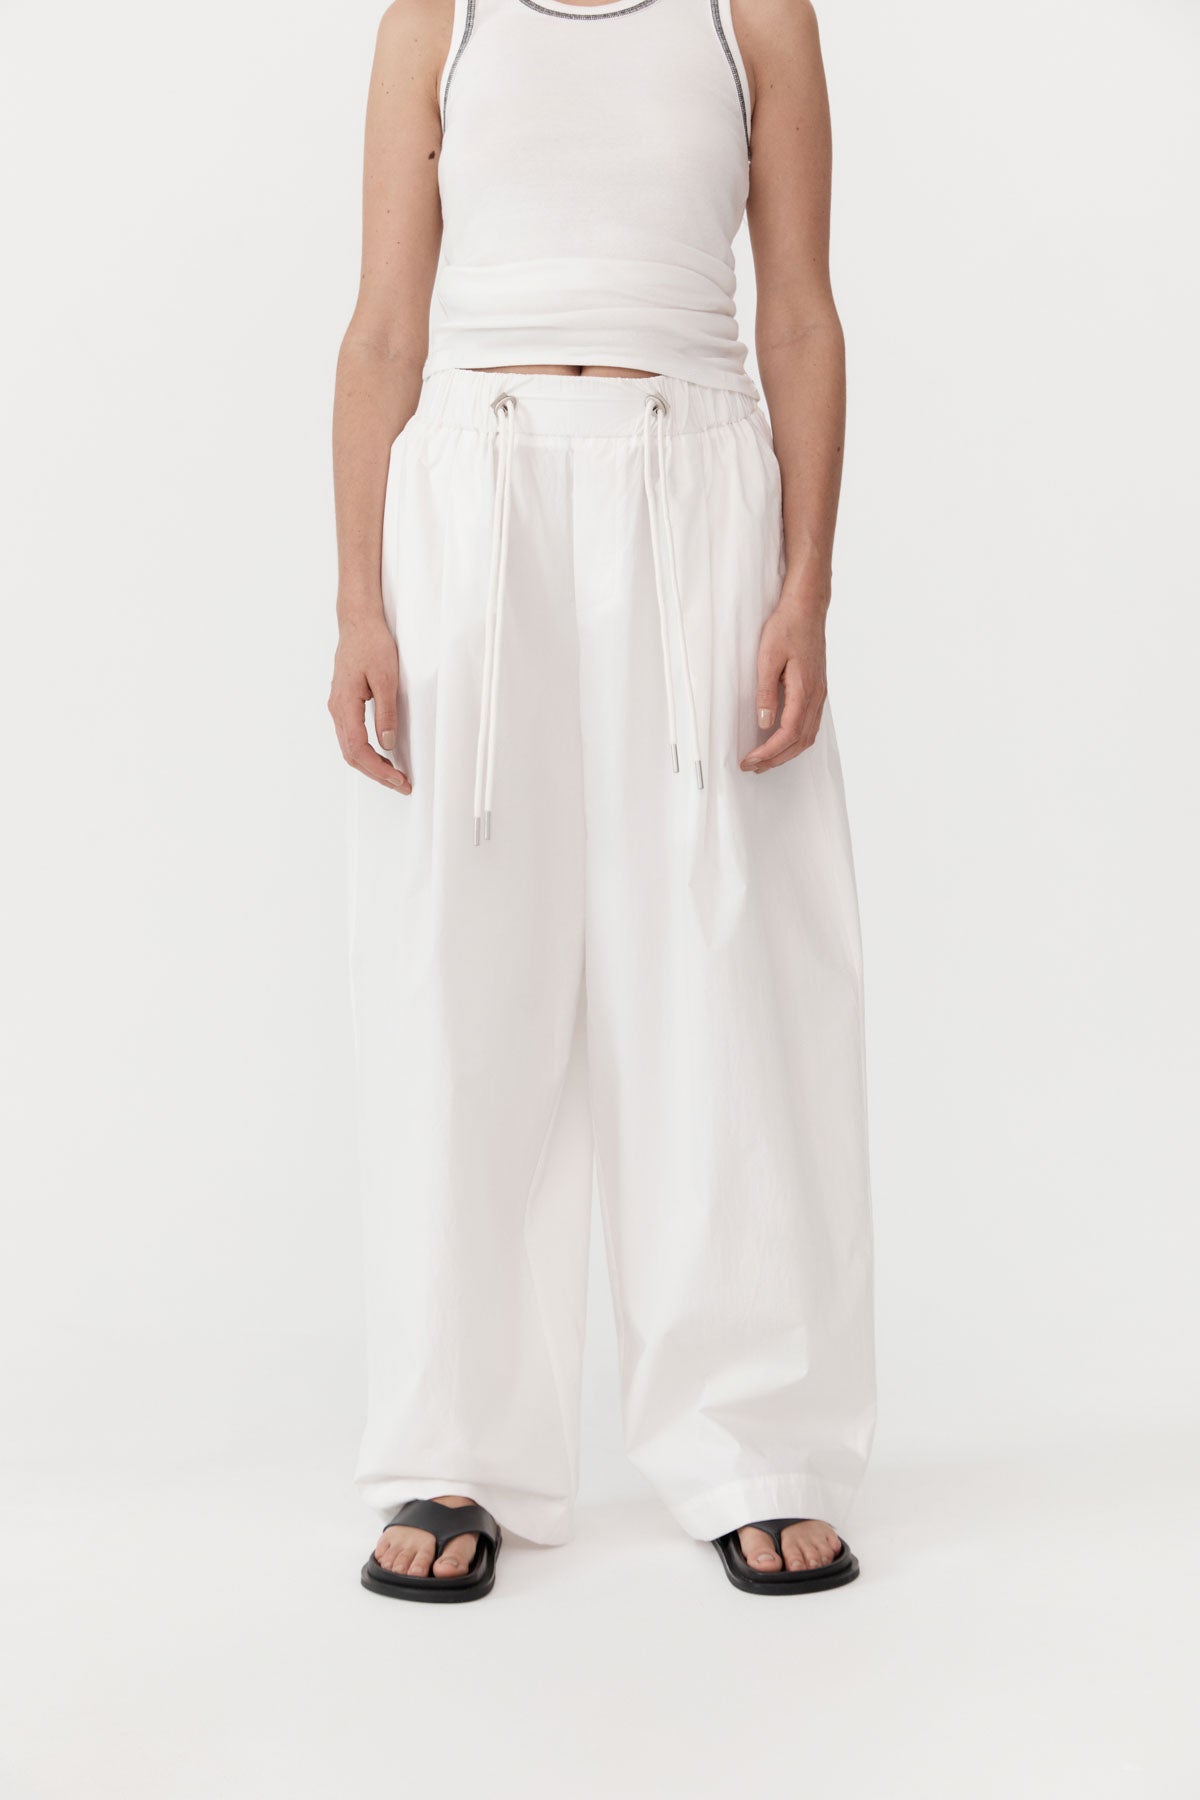 Relaxed Drawstring Pants - White